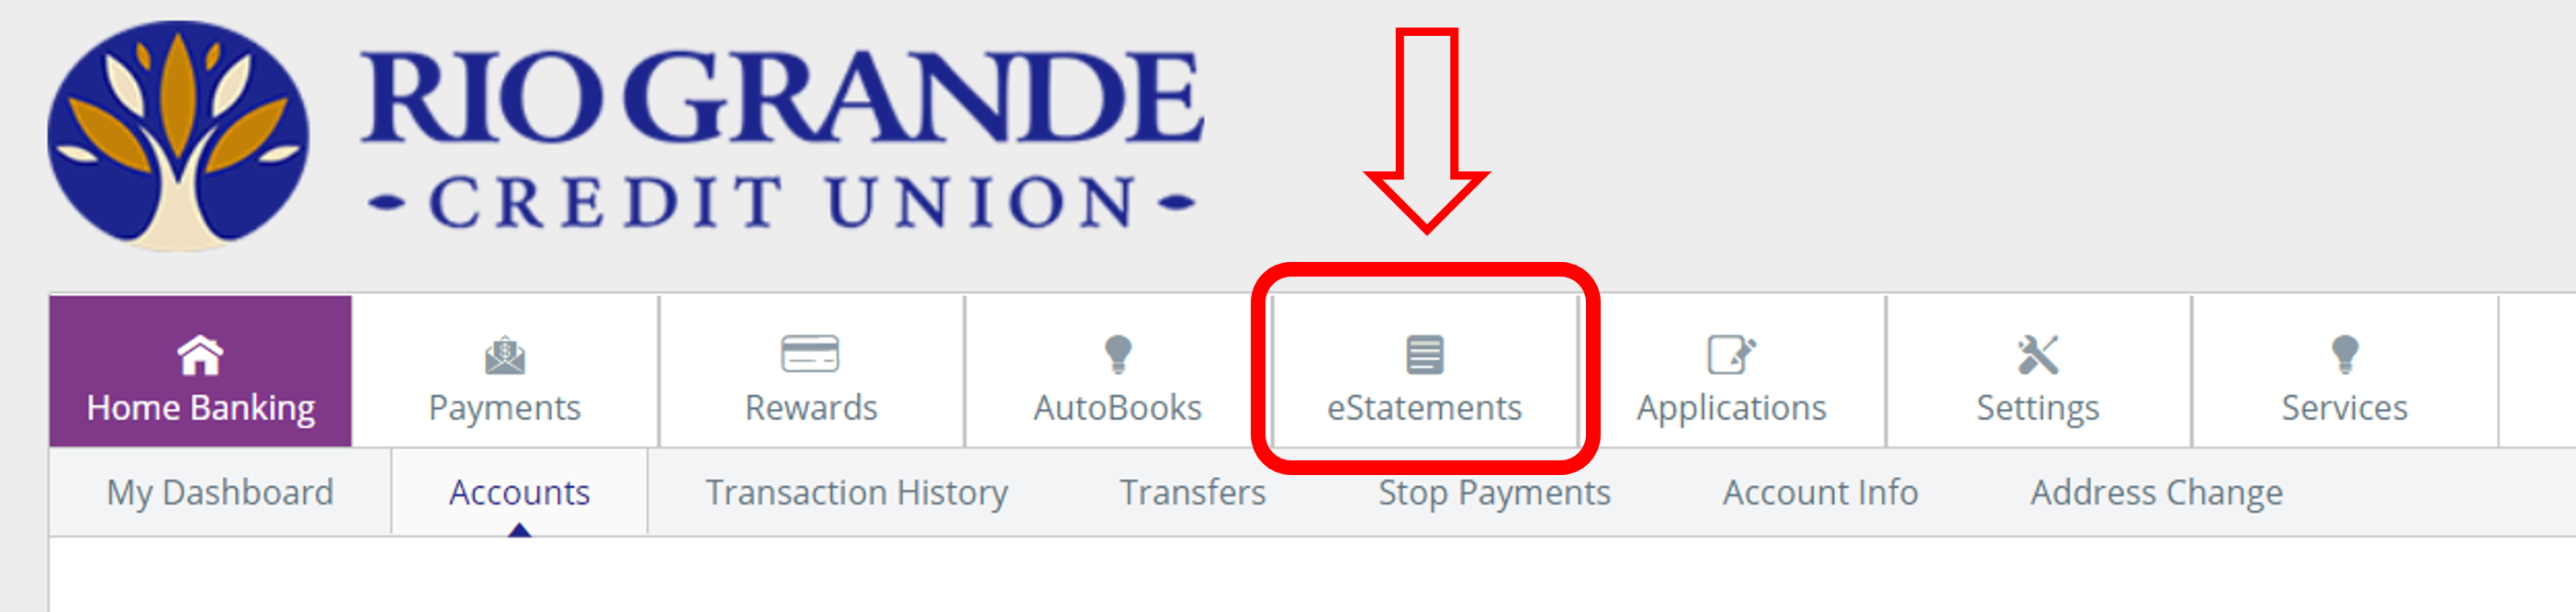 eStatements Step 1 - Log on to online banking and select the eStatements tab.